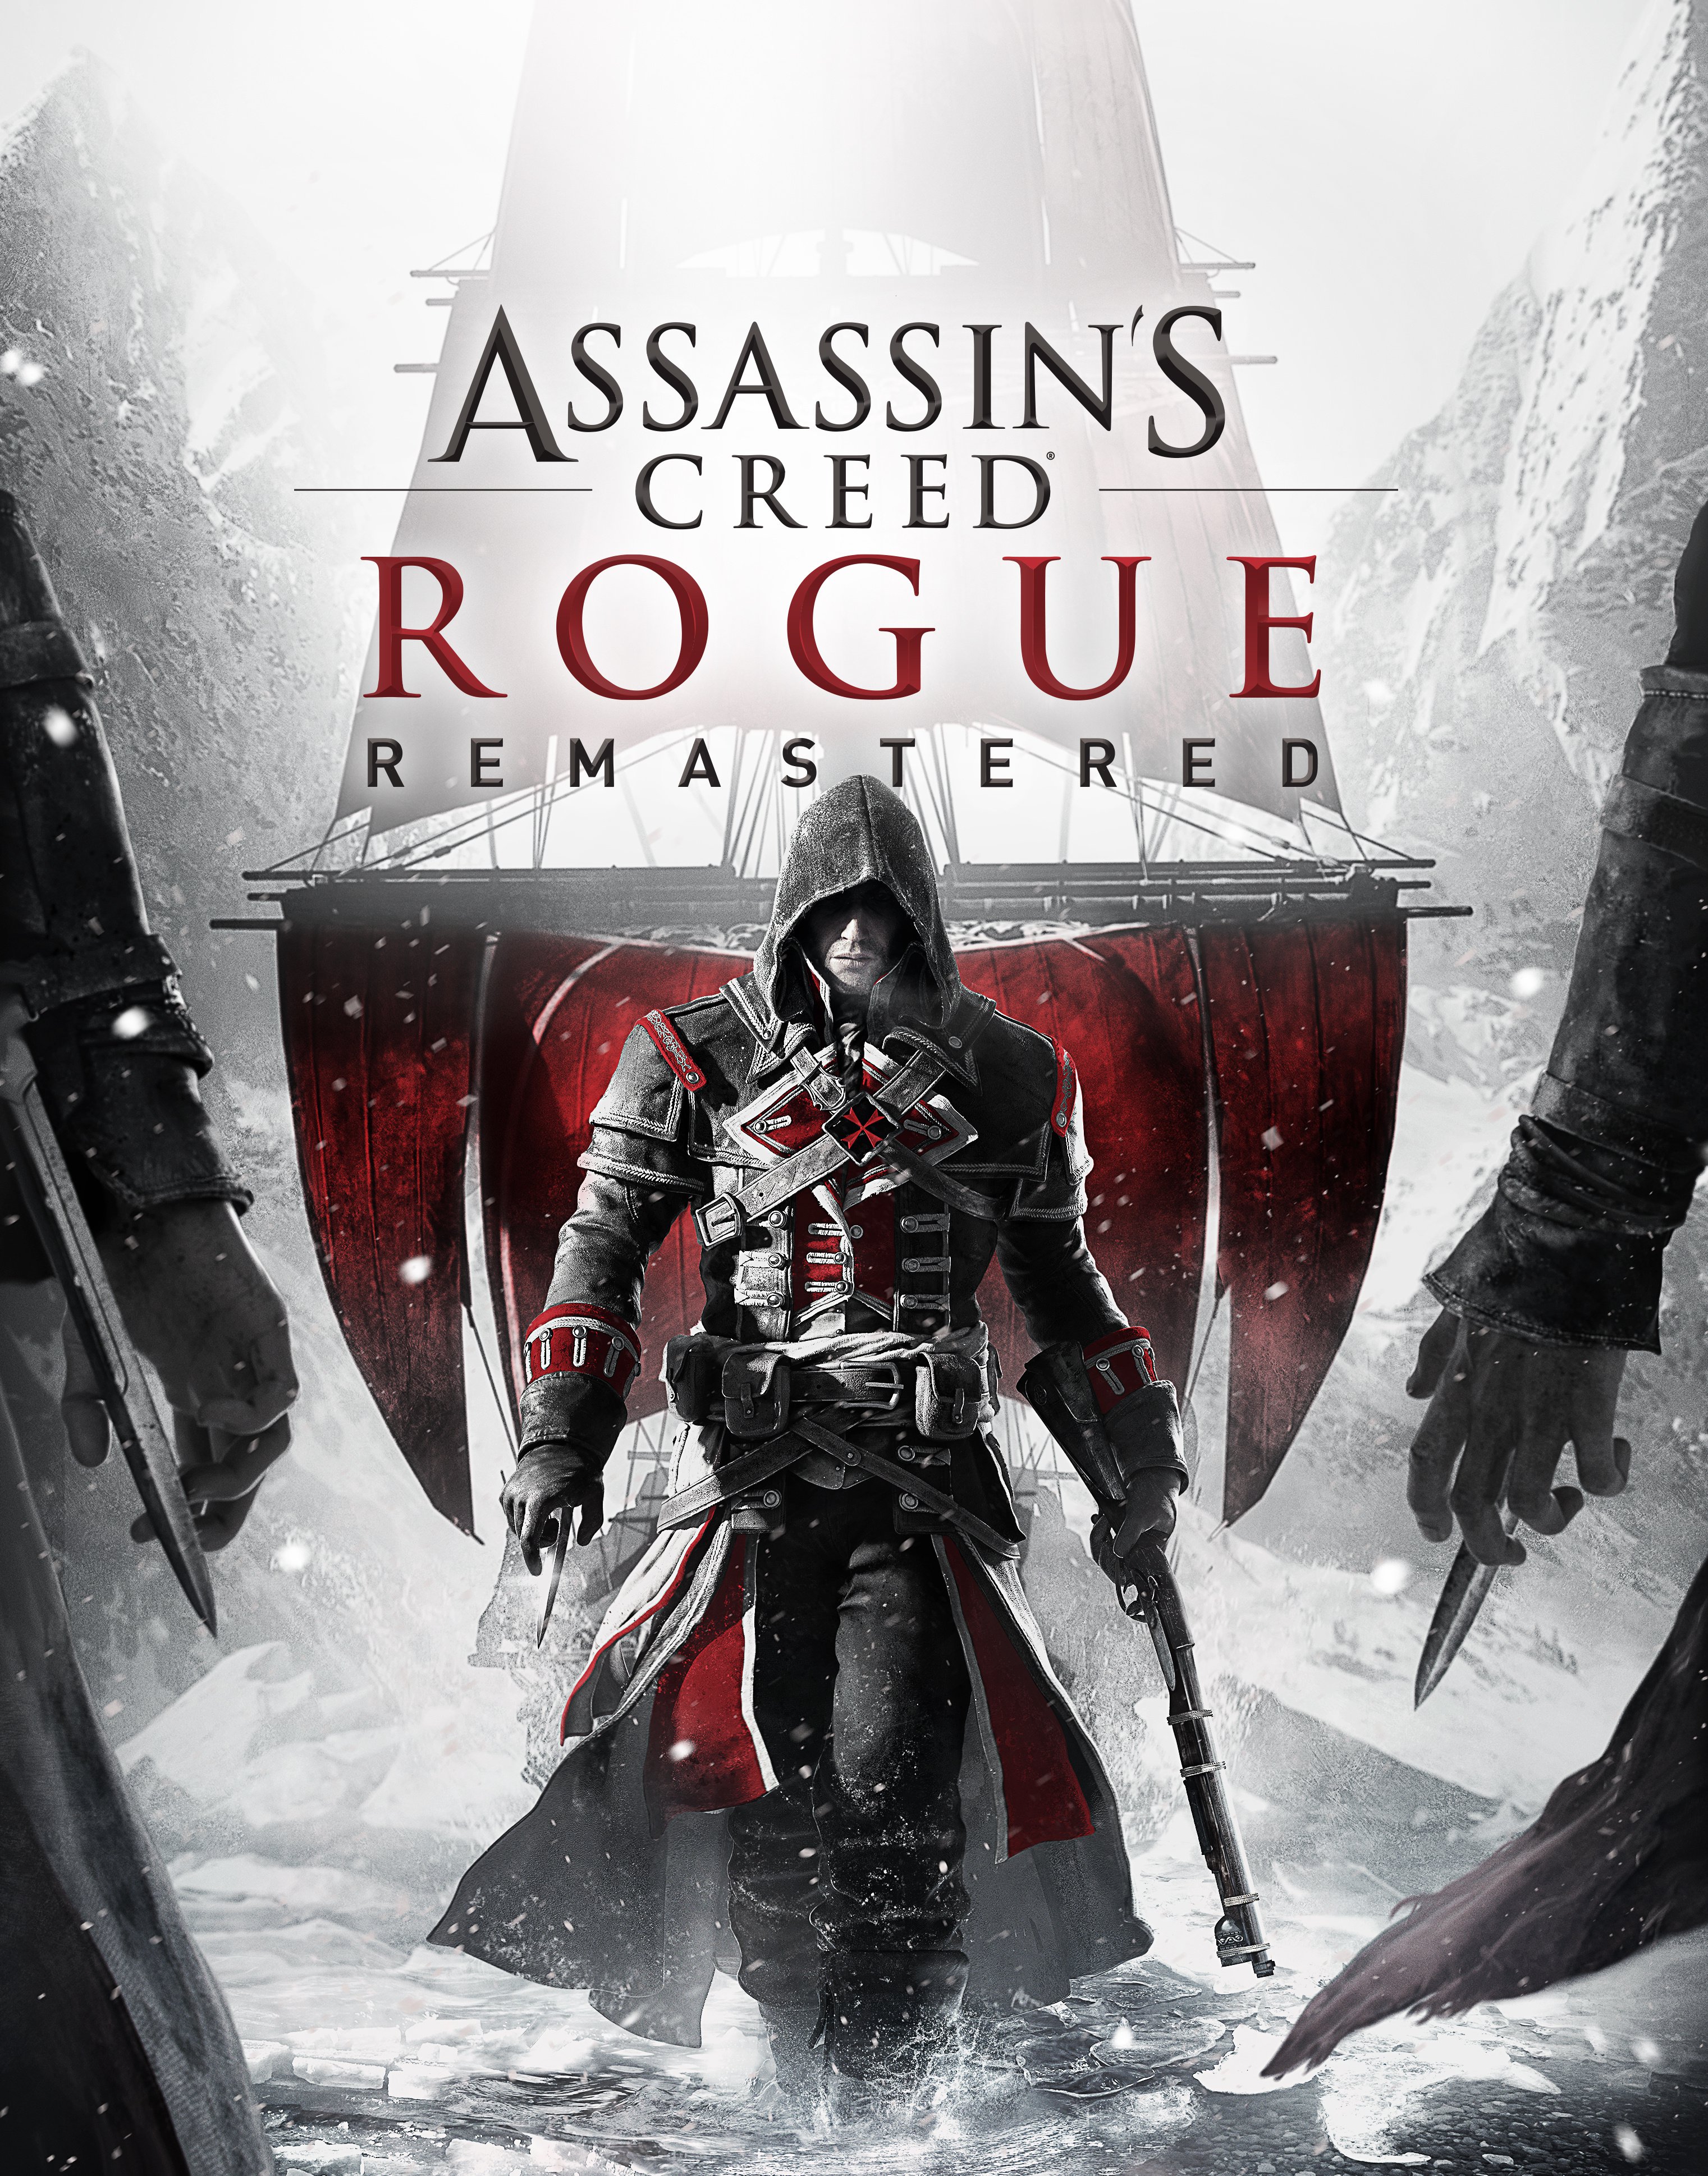 Assassin's Creed Assassin's Creed Rogue Remastered | Offizielle Artworks